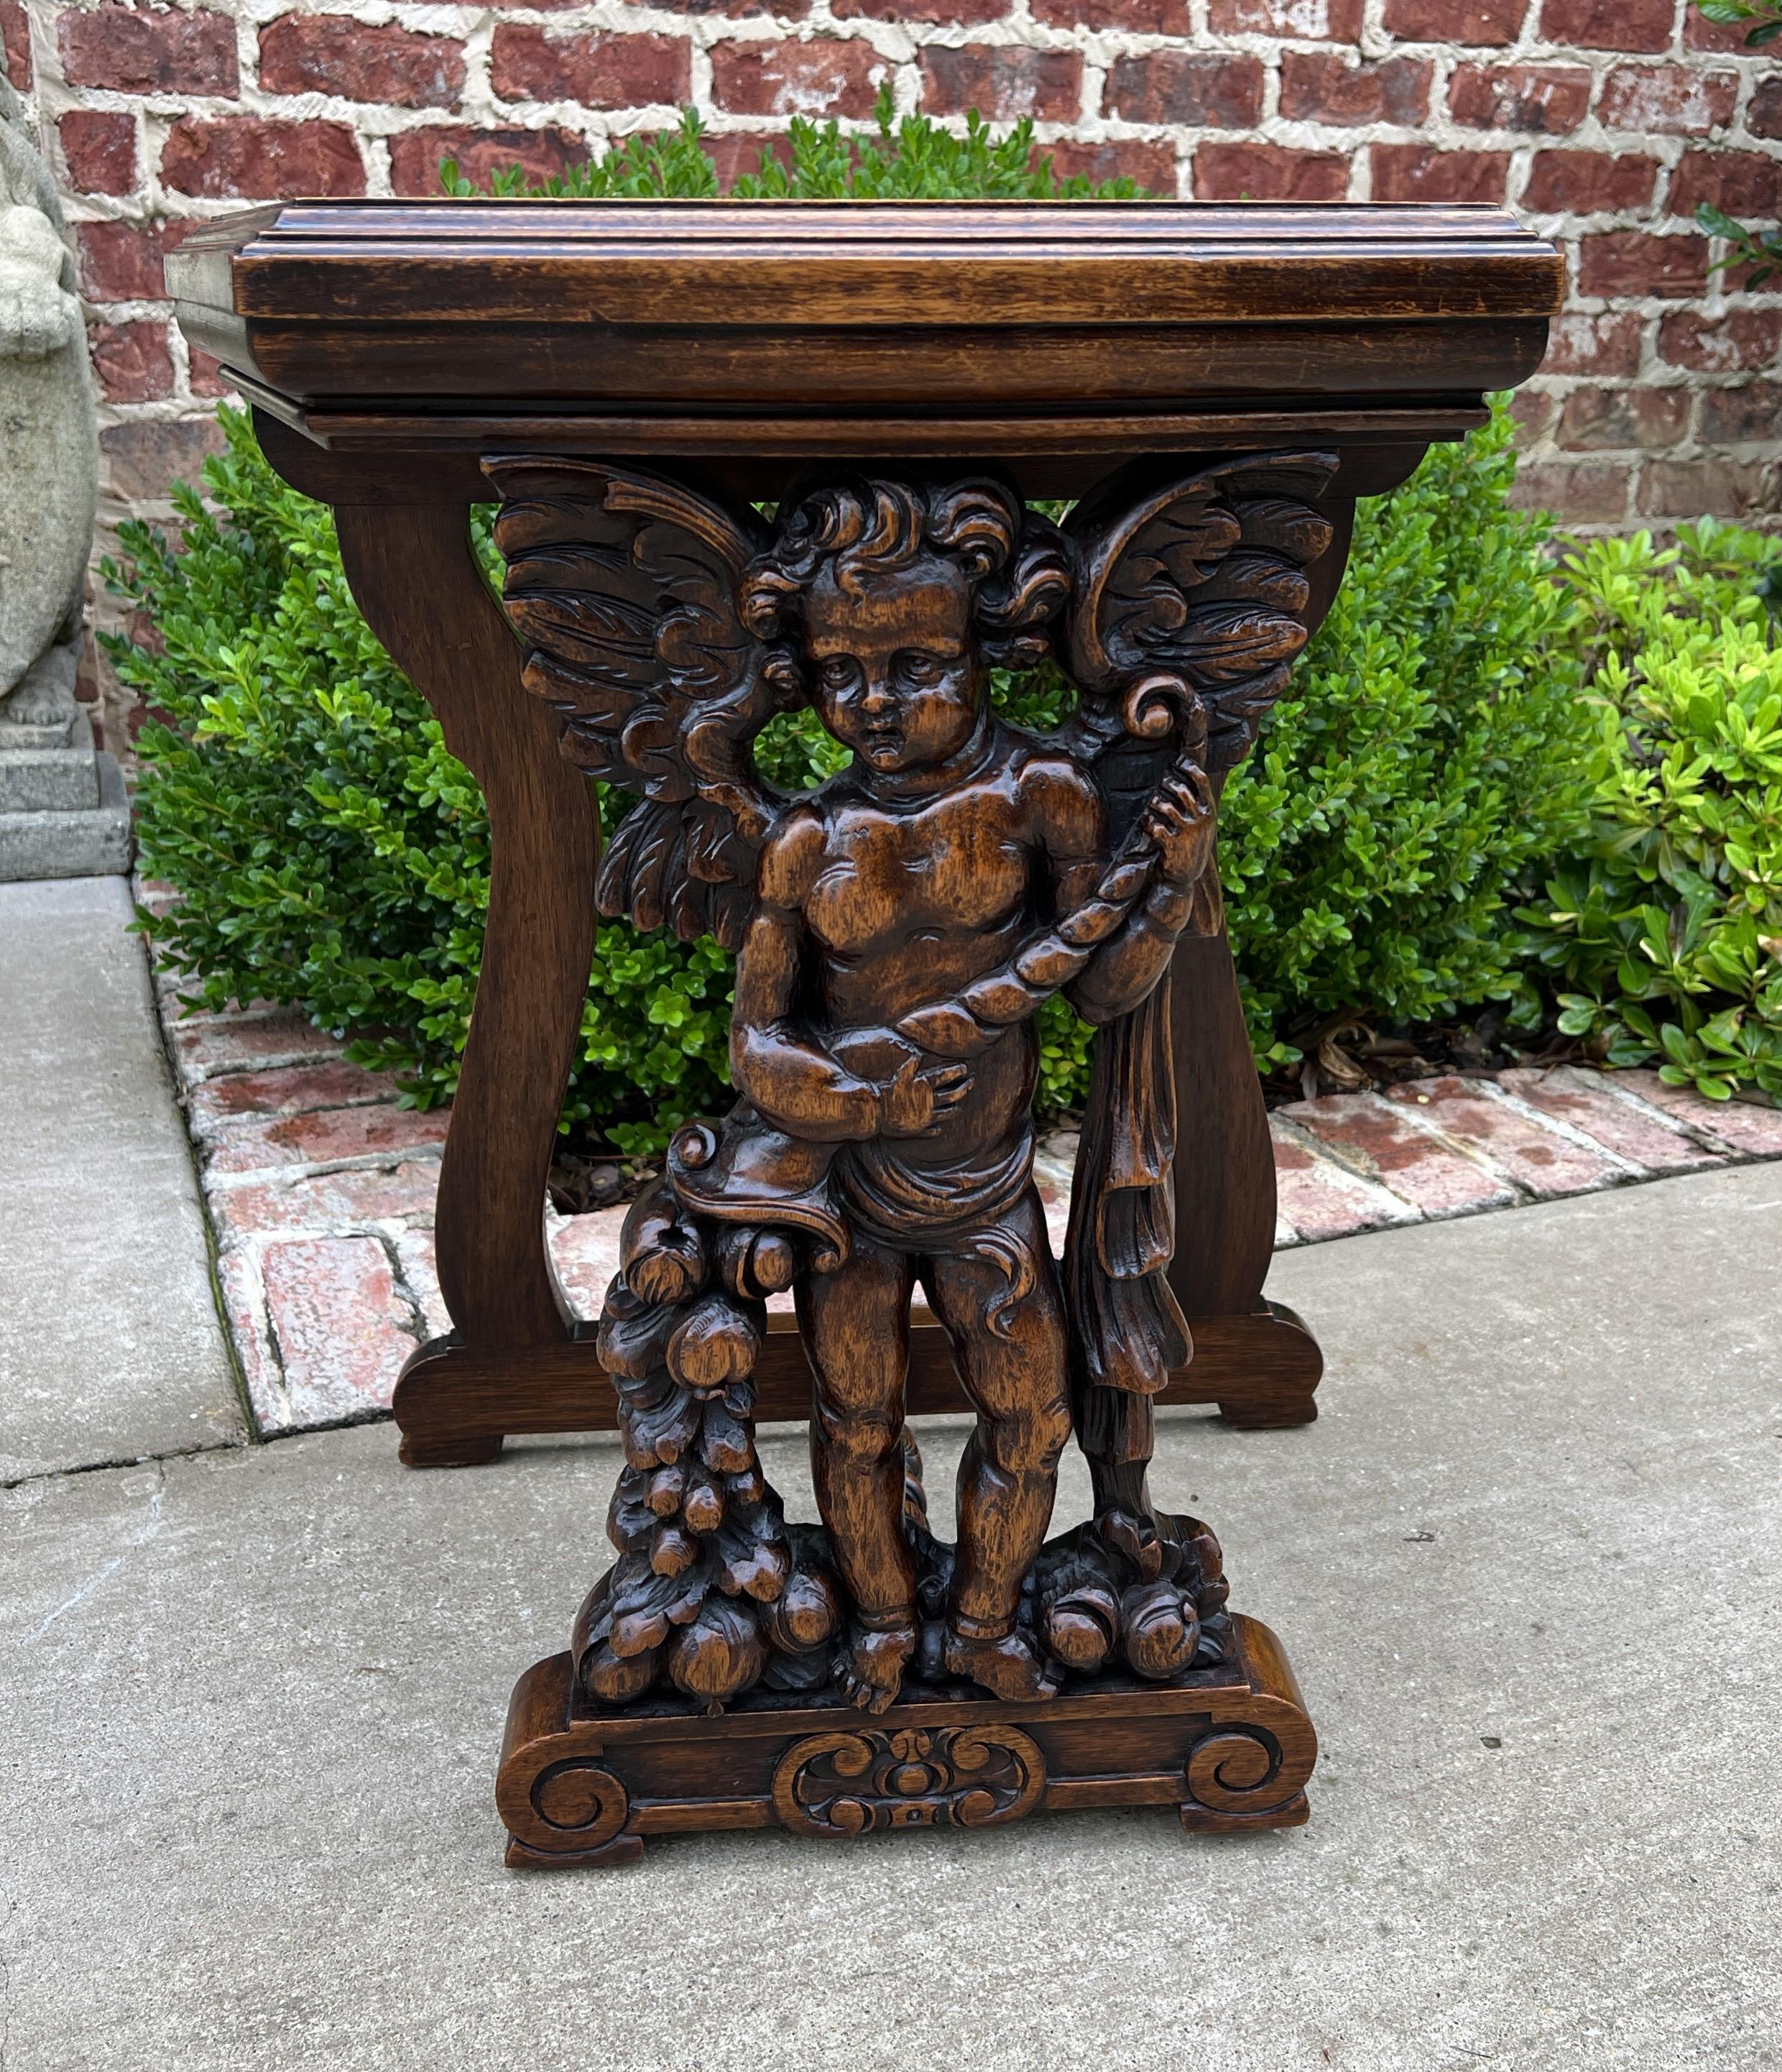 UNIQUE and CHARMING Antique French Walnut End Table, Side Table, Pedestal, or Nightstand with HIGHLY CARVED Cherub and Beveled Edge~~c. 1900

Versatile size~~23.5